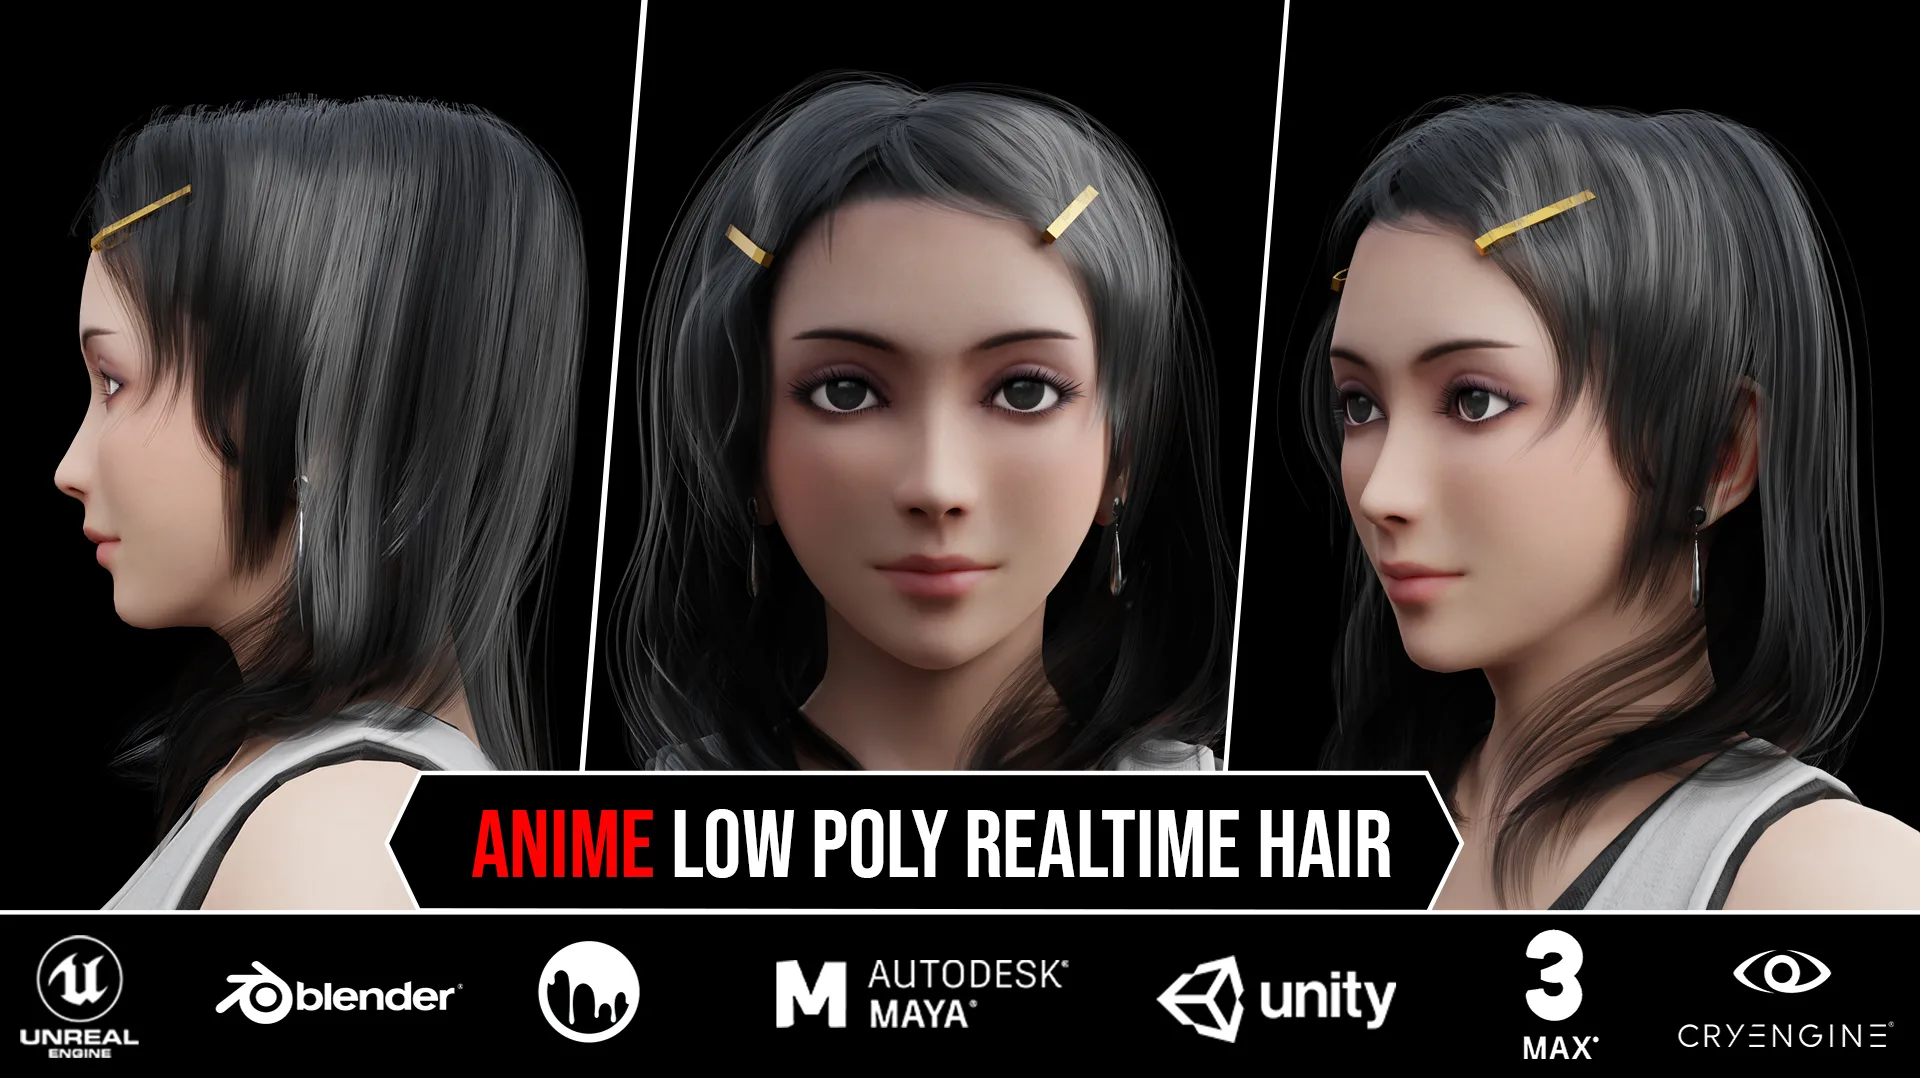 6 Anime Low Poly Realtime Hair Cards 1$ For Each Model